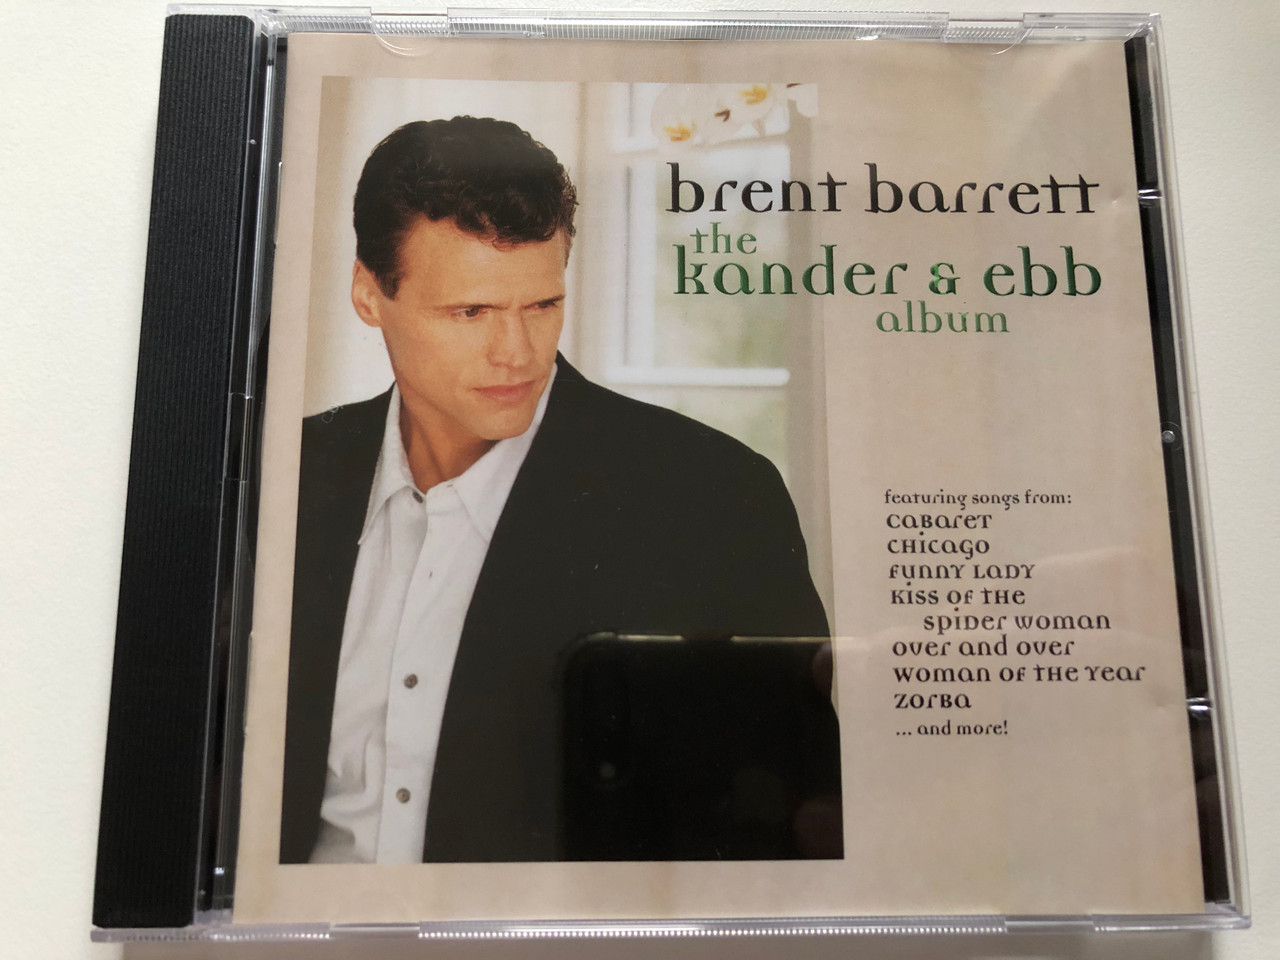 https://cdn10.bigcommerce.com/s-62bdpkt7pb/products/0/images/221965/Brent_Barrett_-_The_Kander_Ebb_Album_Featuring_Songs_from_Cabaret_Chicago_Funny_Lady_Kiss_Of_The_Spider_Woman_Over_And_Over_Woman_Of_The_Year_Zorba...and_more_Varse_Sarabande_Rec_1__67002.1649868722.1280.1280.JPG?c=2&_gl=1*tdsxrt*_ga*MjA2NTIxMjE2MC4xNTkwNTEyNTMy*_ga_WS2VZYPC6G*MTY0OTg1ODIyMS4zNTUuMS4xNjQ5ODY4Mjk0LjQ.